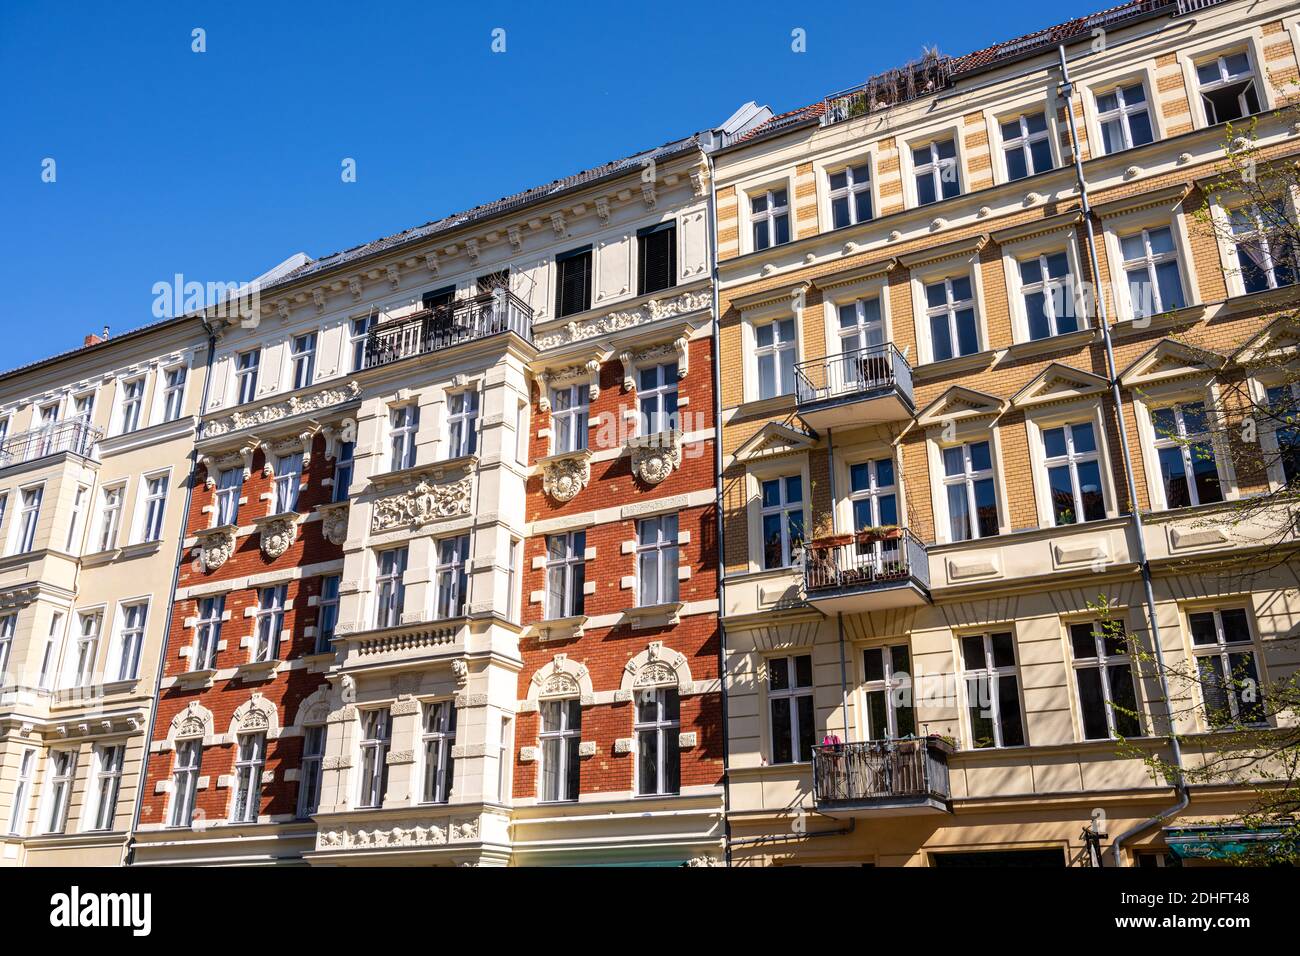 The facades of some renovated old apartment buildings seen in Berlin, Germany Stock Photo